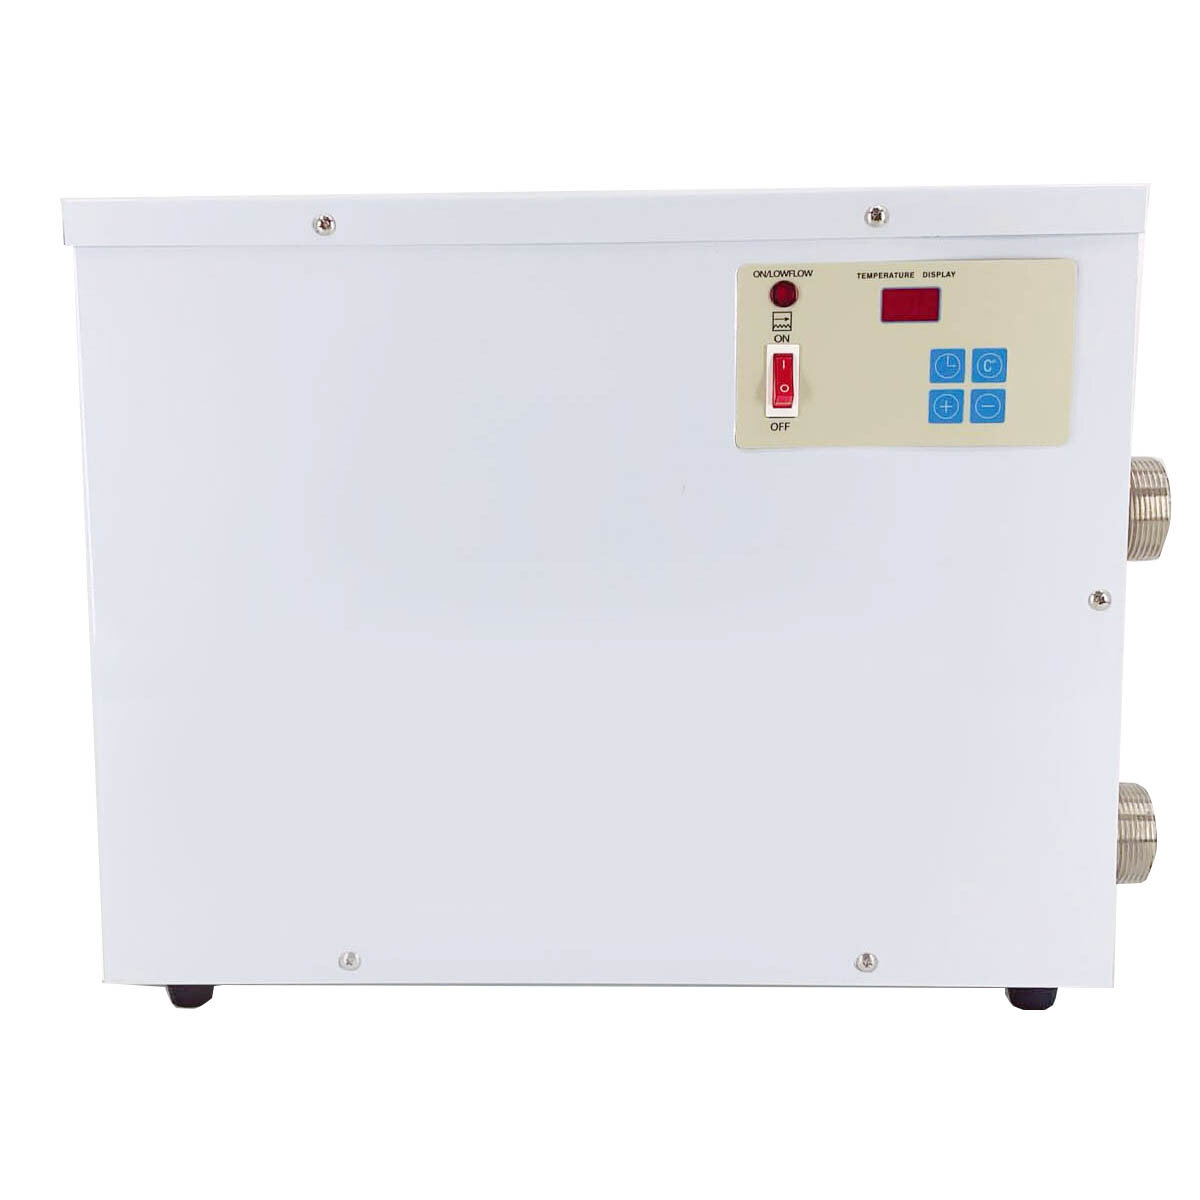 15kw Swimming Pool Heater Spa Constant Temperature Hot Tub Electric Water 220v for sale online 